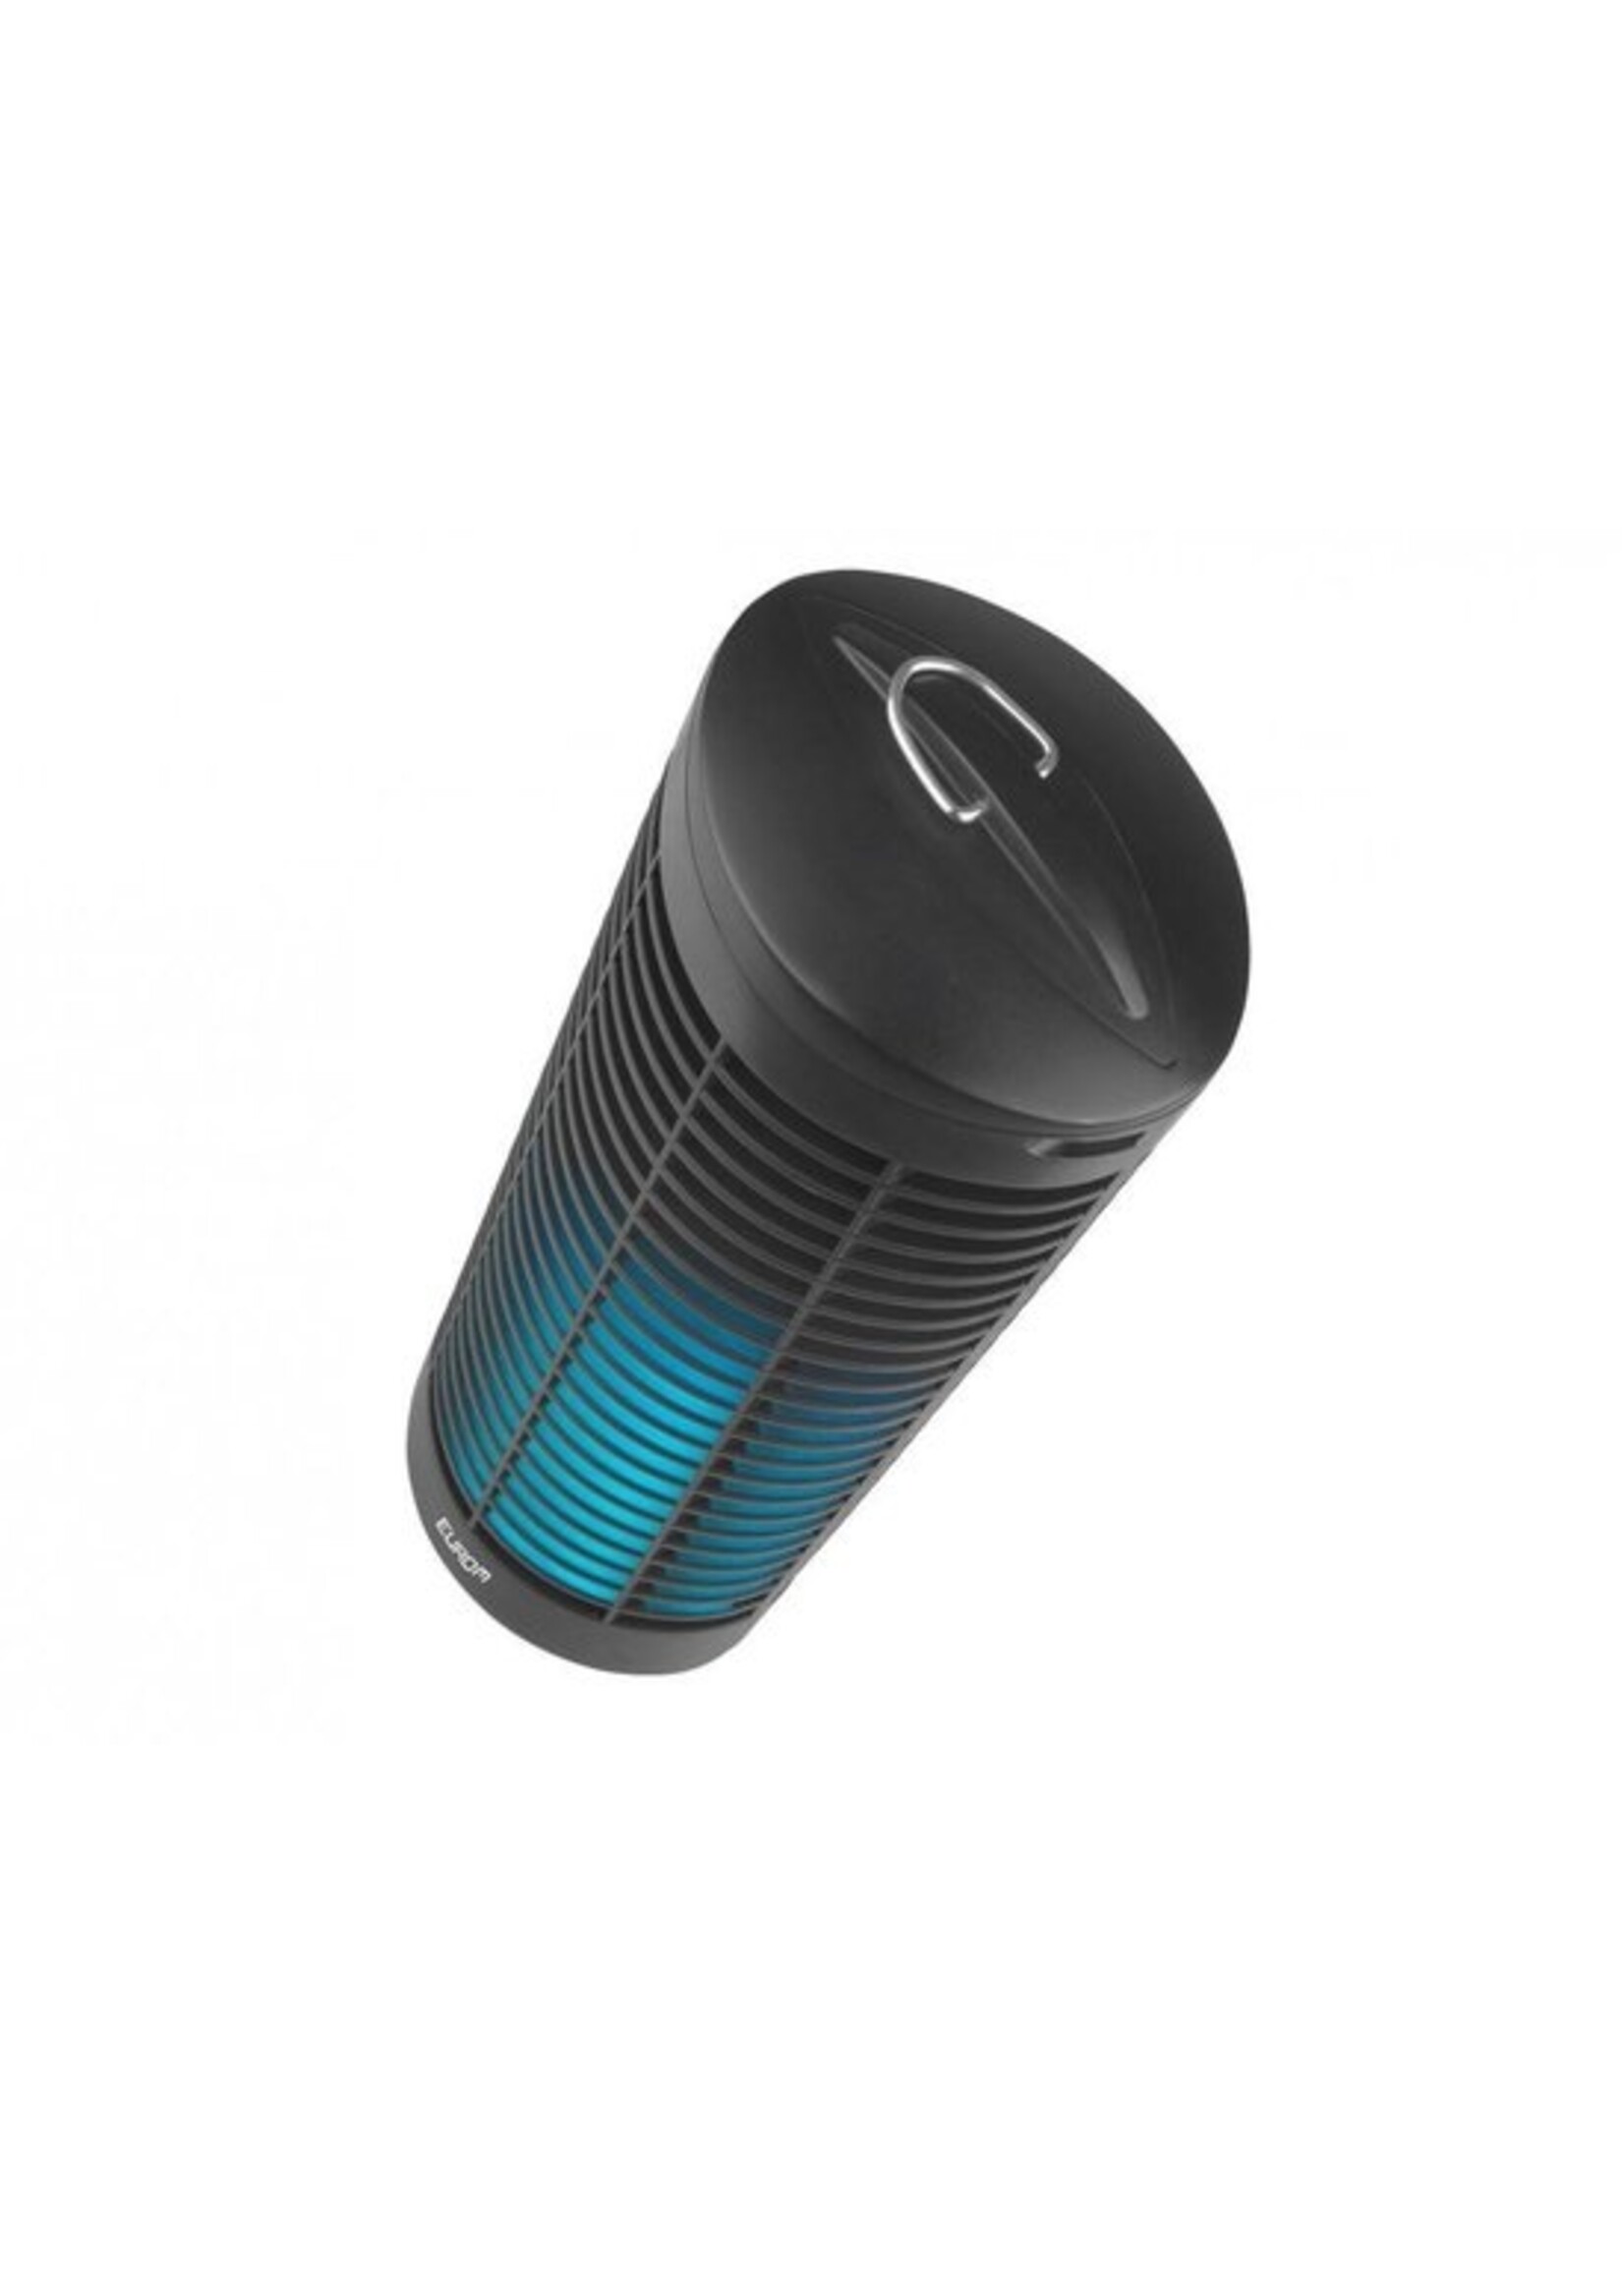 Fly Away 11 Oval Insect Killer | Vliegenlamp